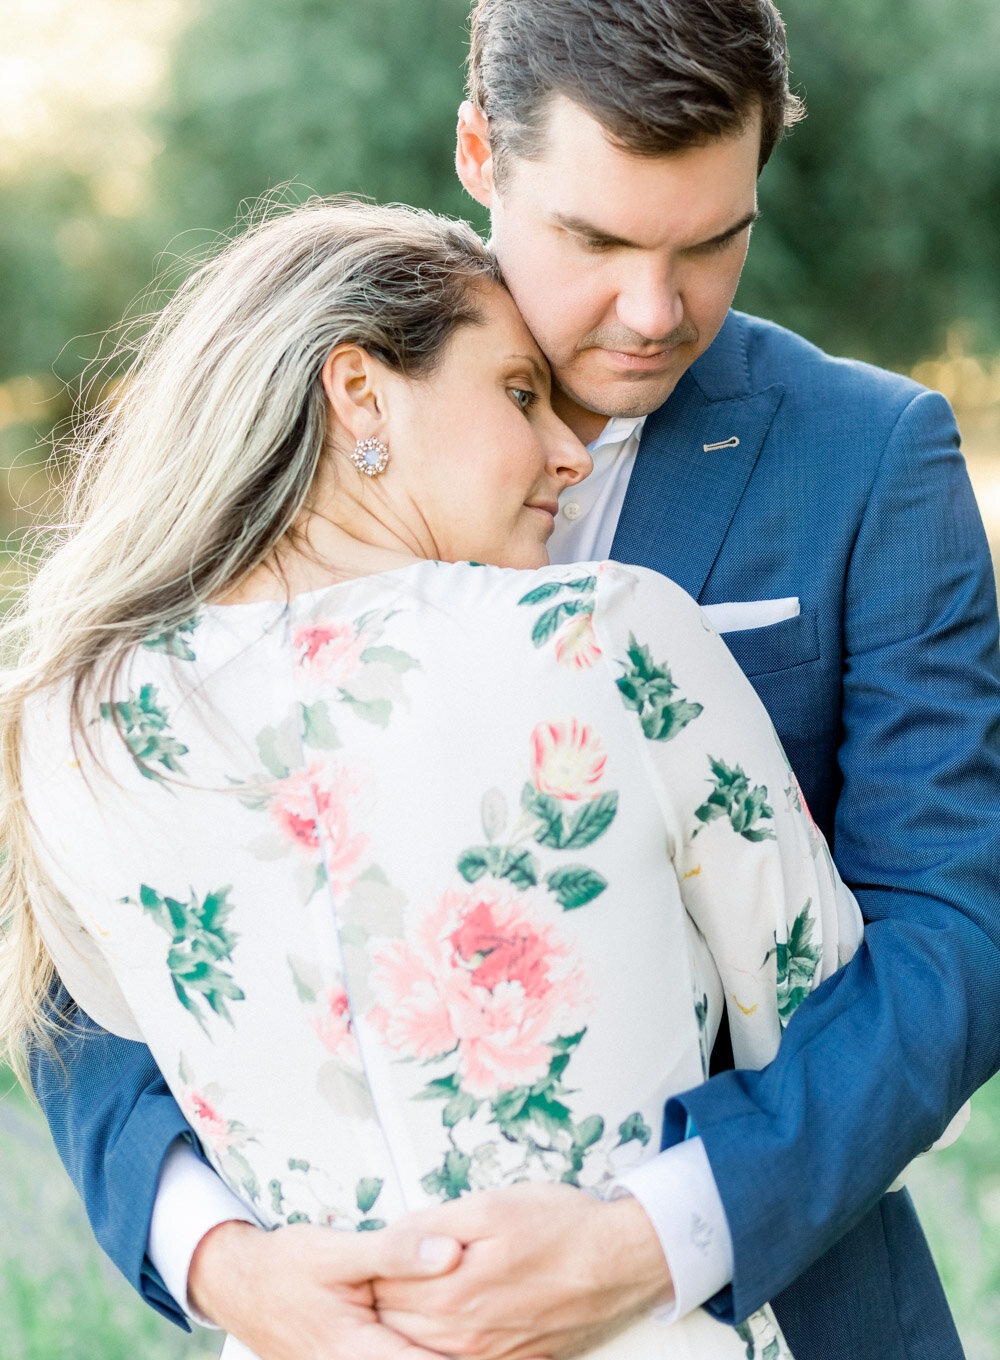 Olive Grove Engagement in Napa